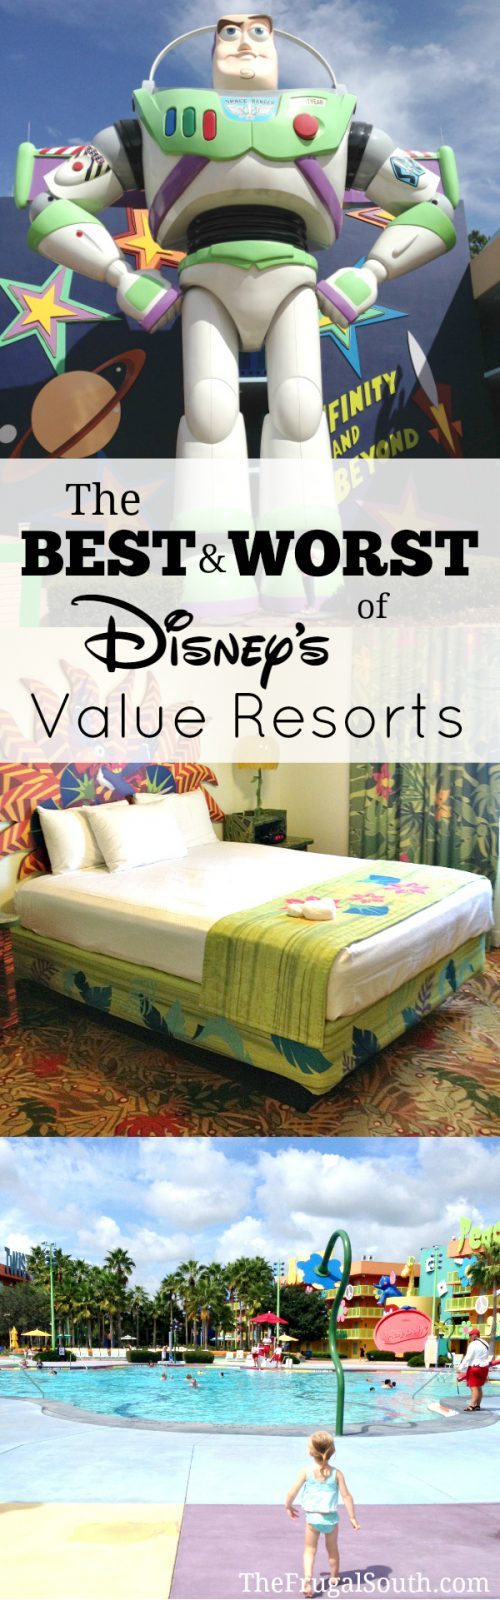 The best and worst of the Value Resorts at Walt Disney World! Not all Value resorts are created equal, so here are my picks for the best and worst options. #familyvacation #disneyworld